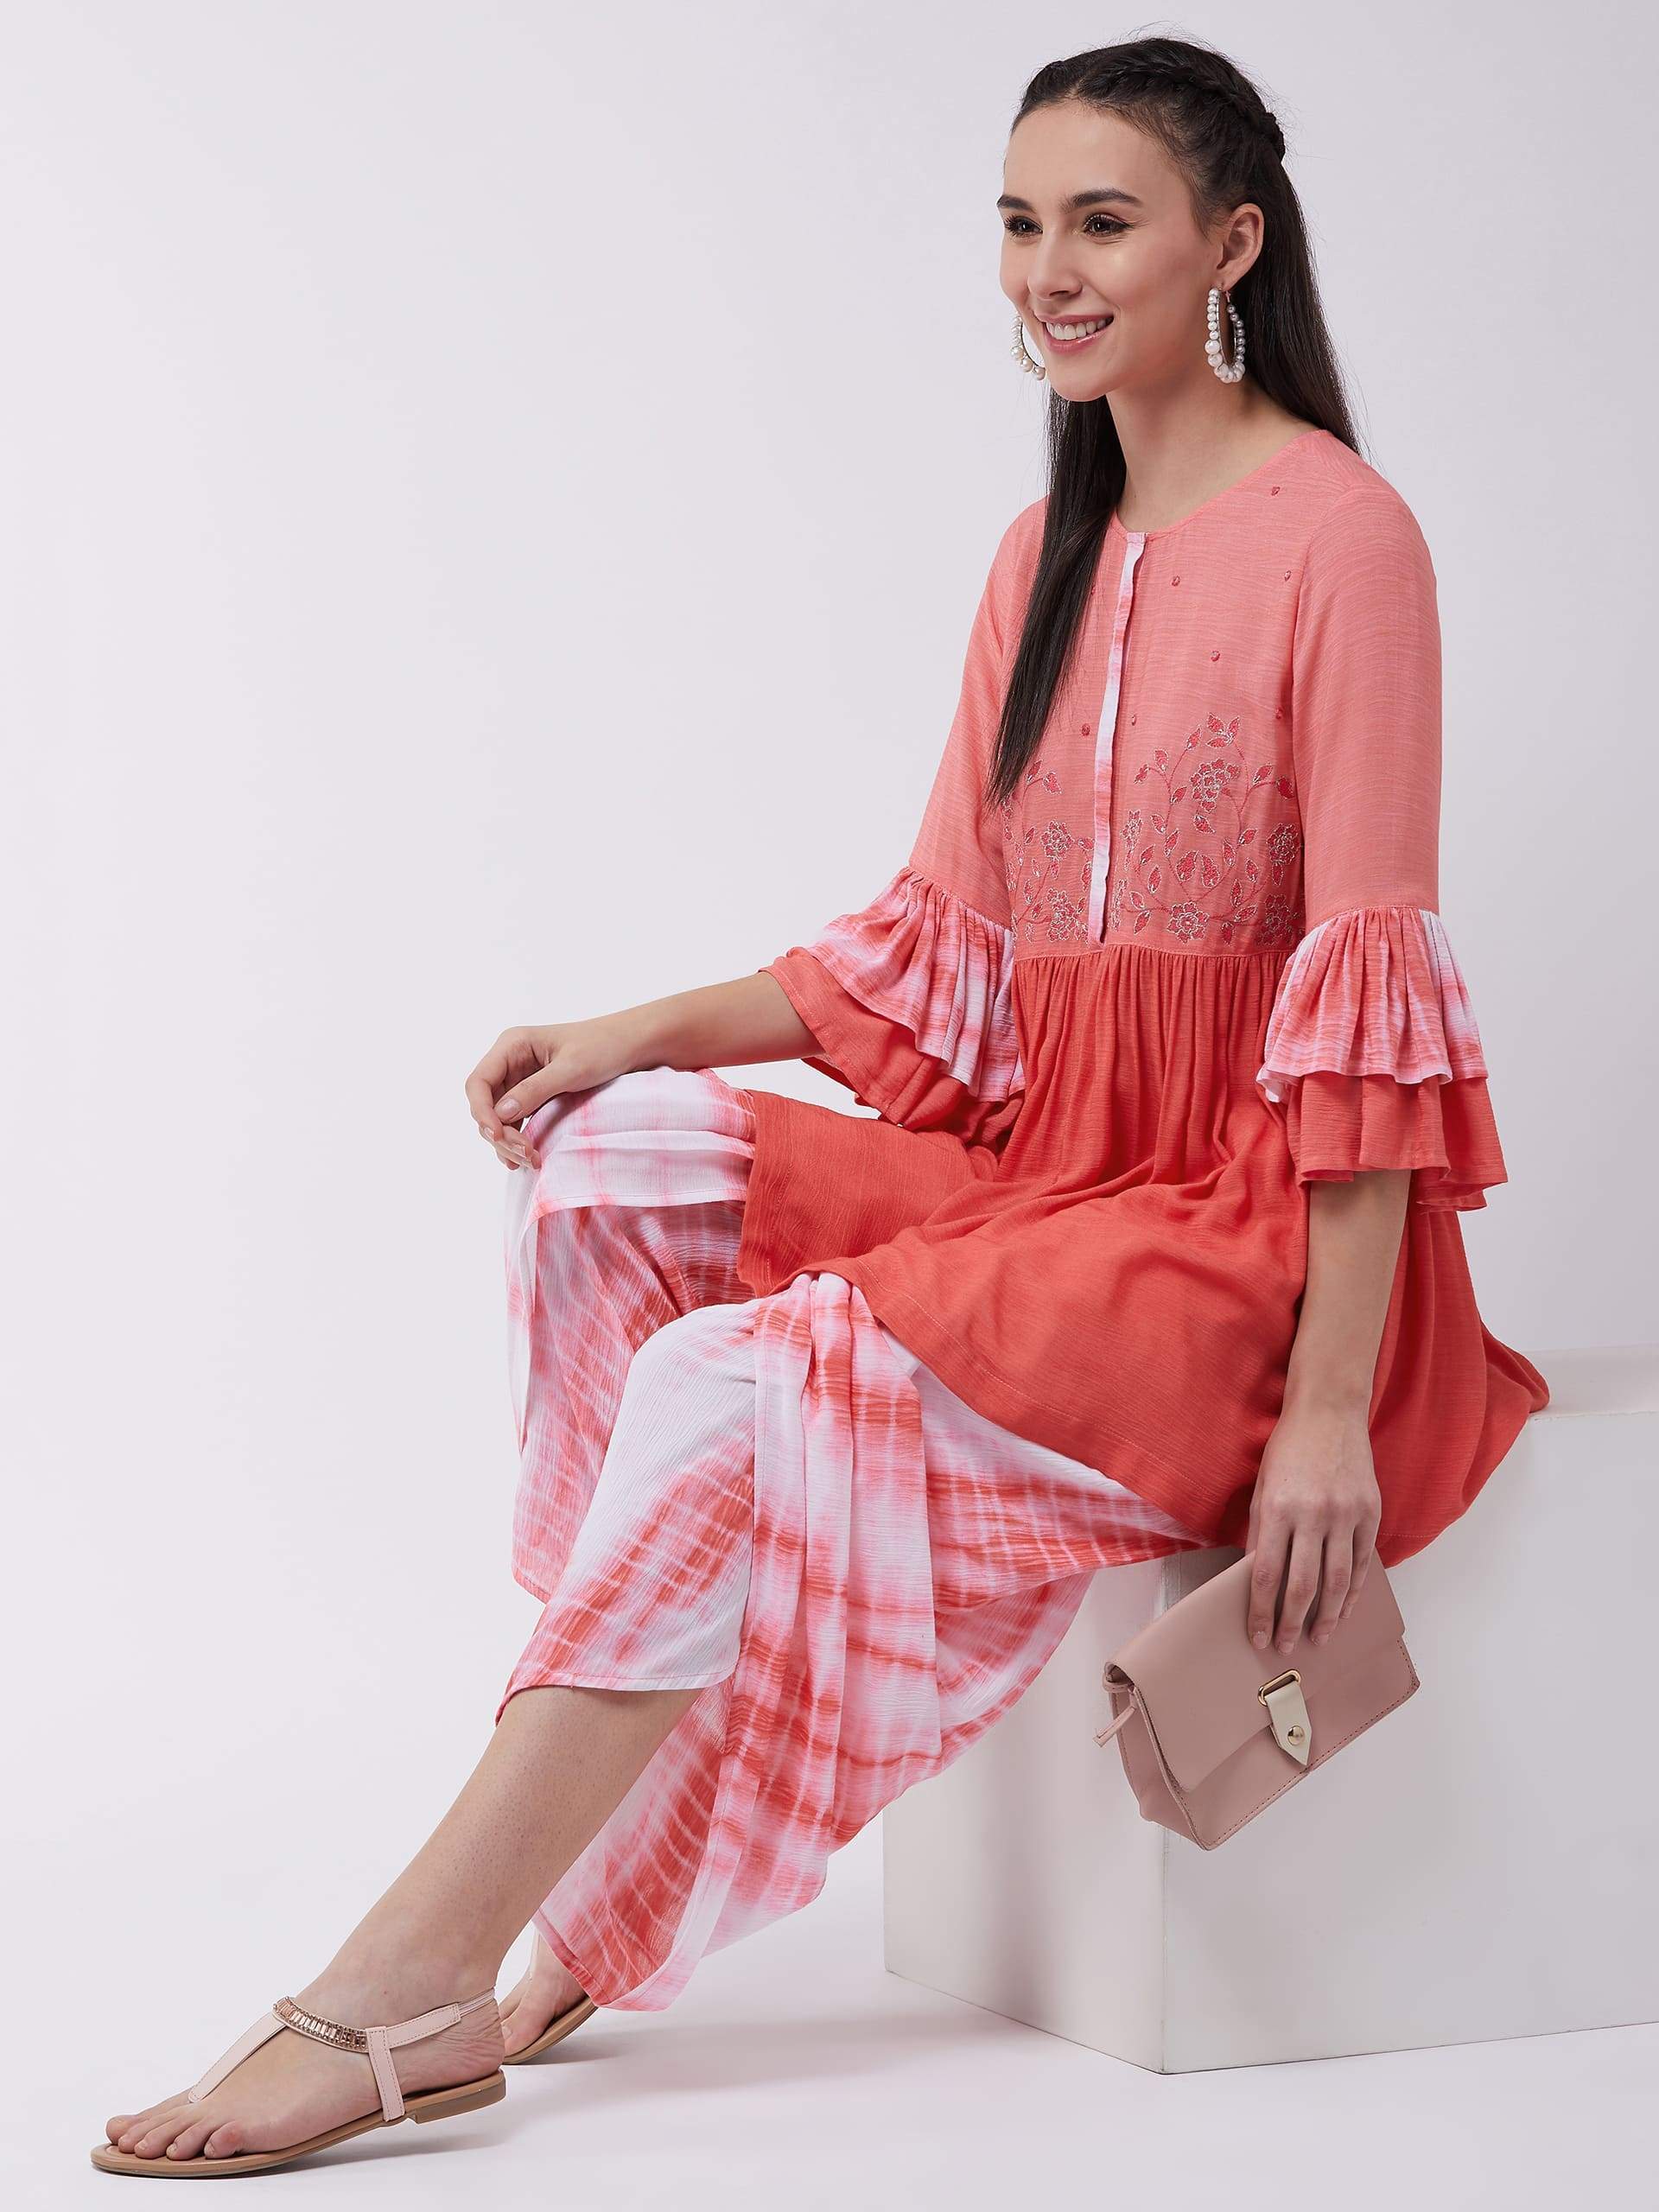 Women's Ombre Tie-Dye Top With Dhoti Set With Embroidery - Pannkh